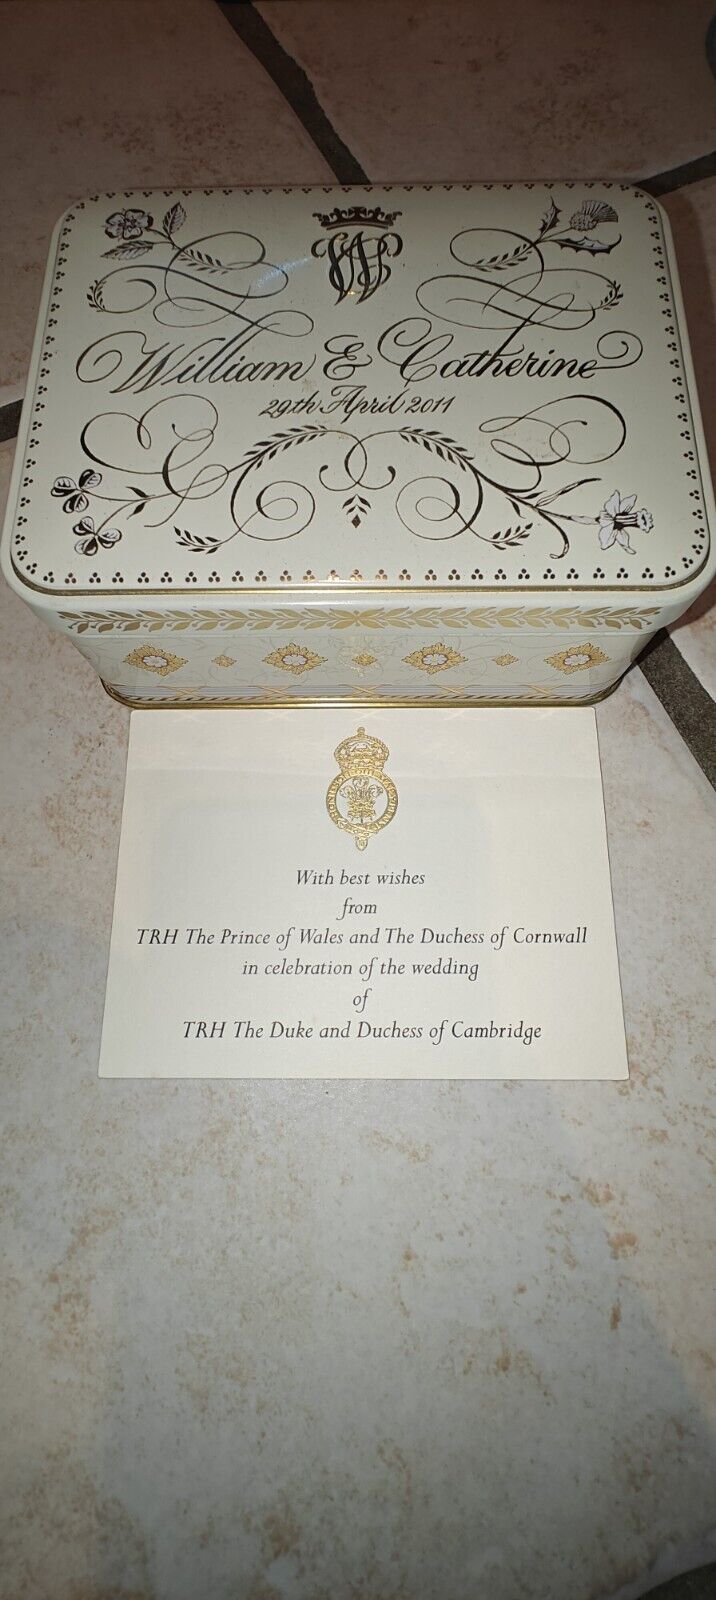 PRINCE WILLIAM AND KATE MIDDLETON WEDDING CAKE 29th April 2011